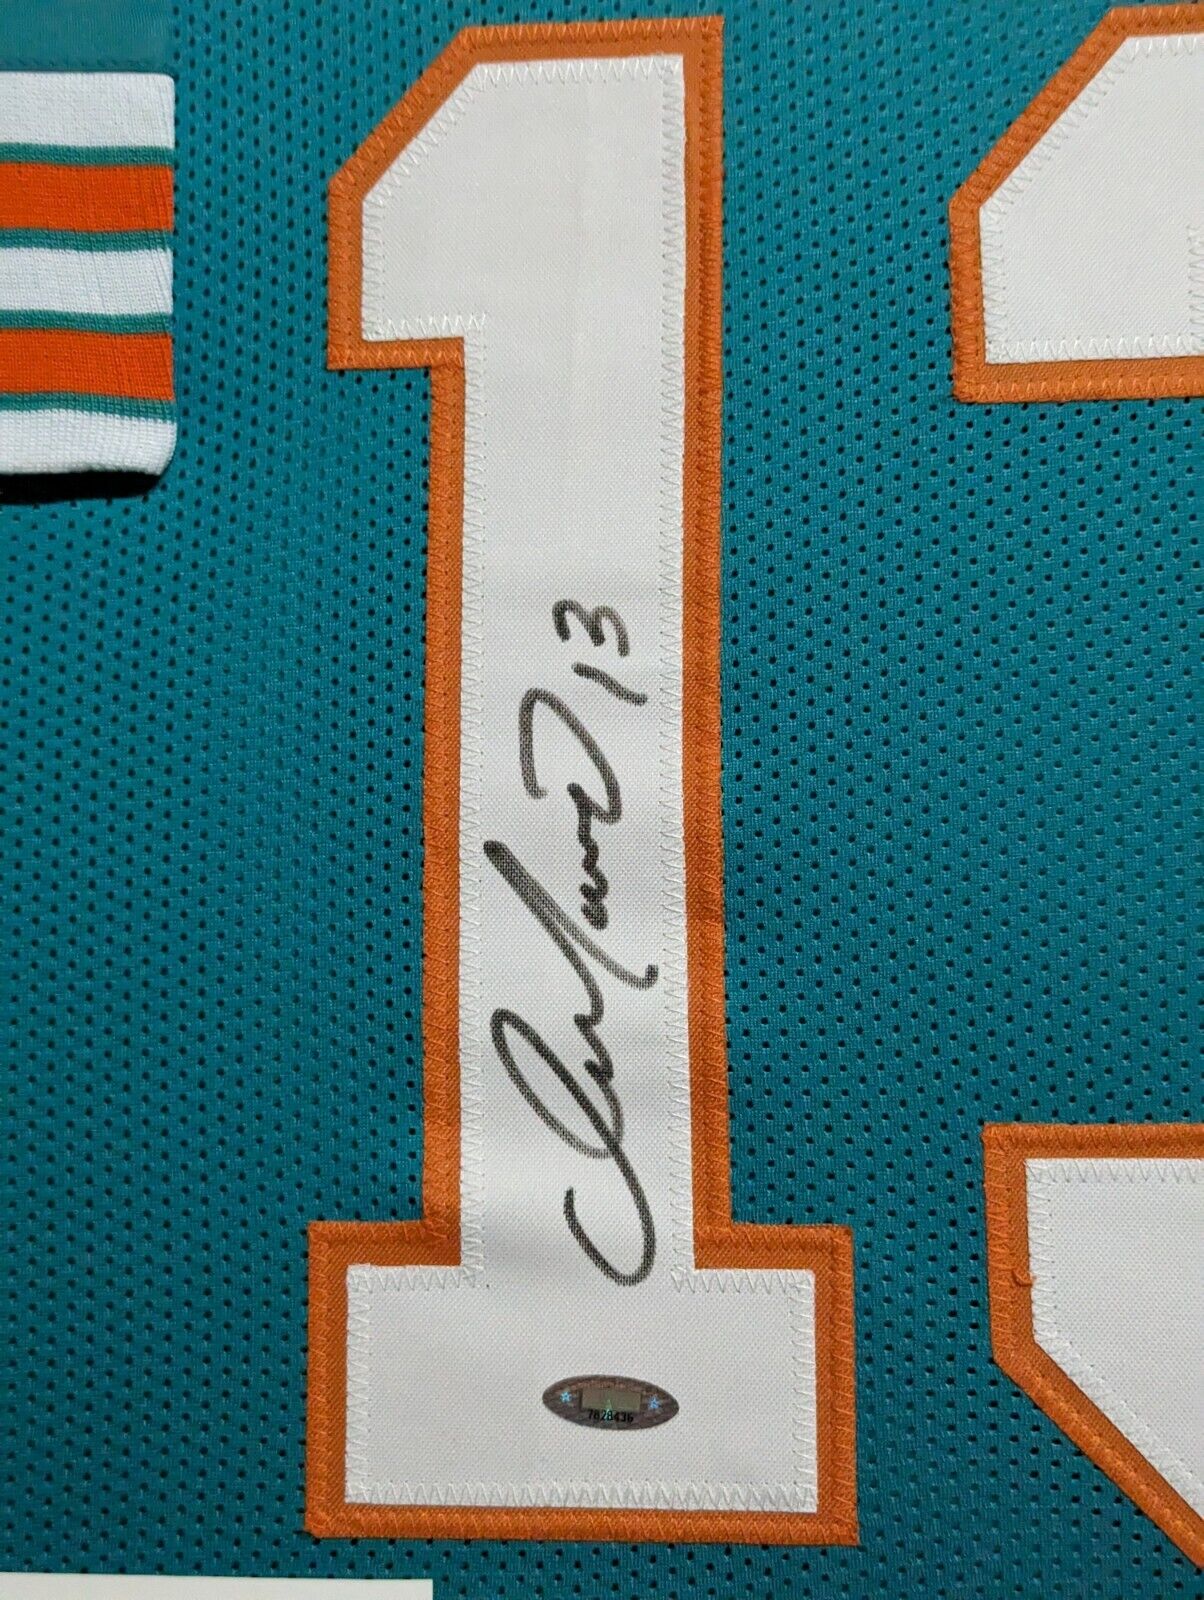 MVP Authentics Framed Miami Dolphins Dan Marino Autographed Signed Jersey Tristar Holo 765 sports jersey framing , jersey framing